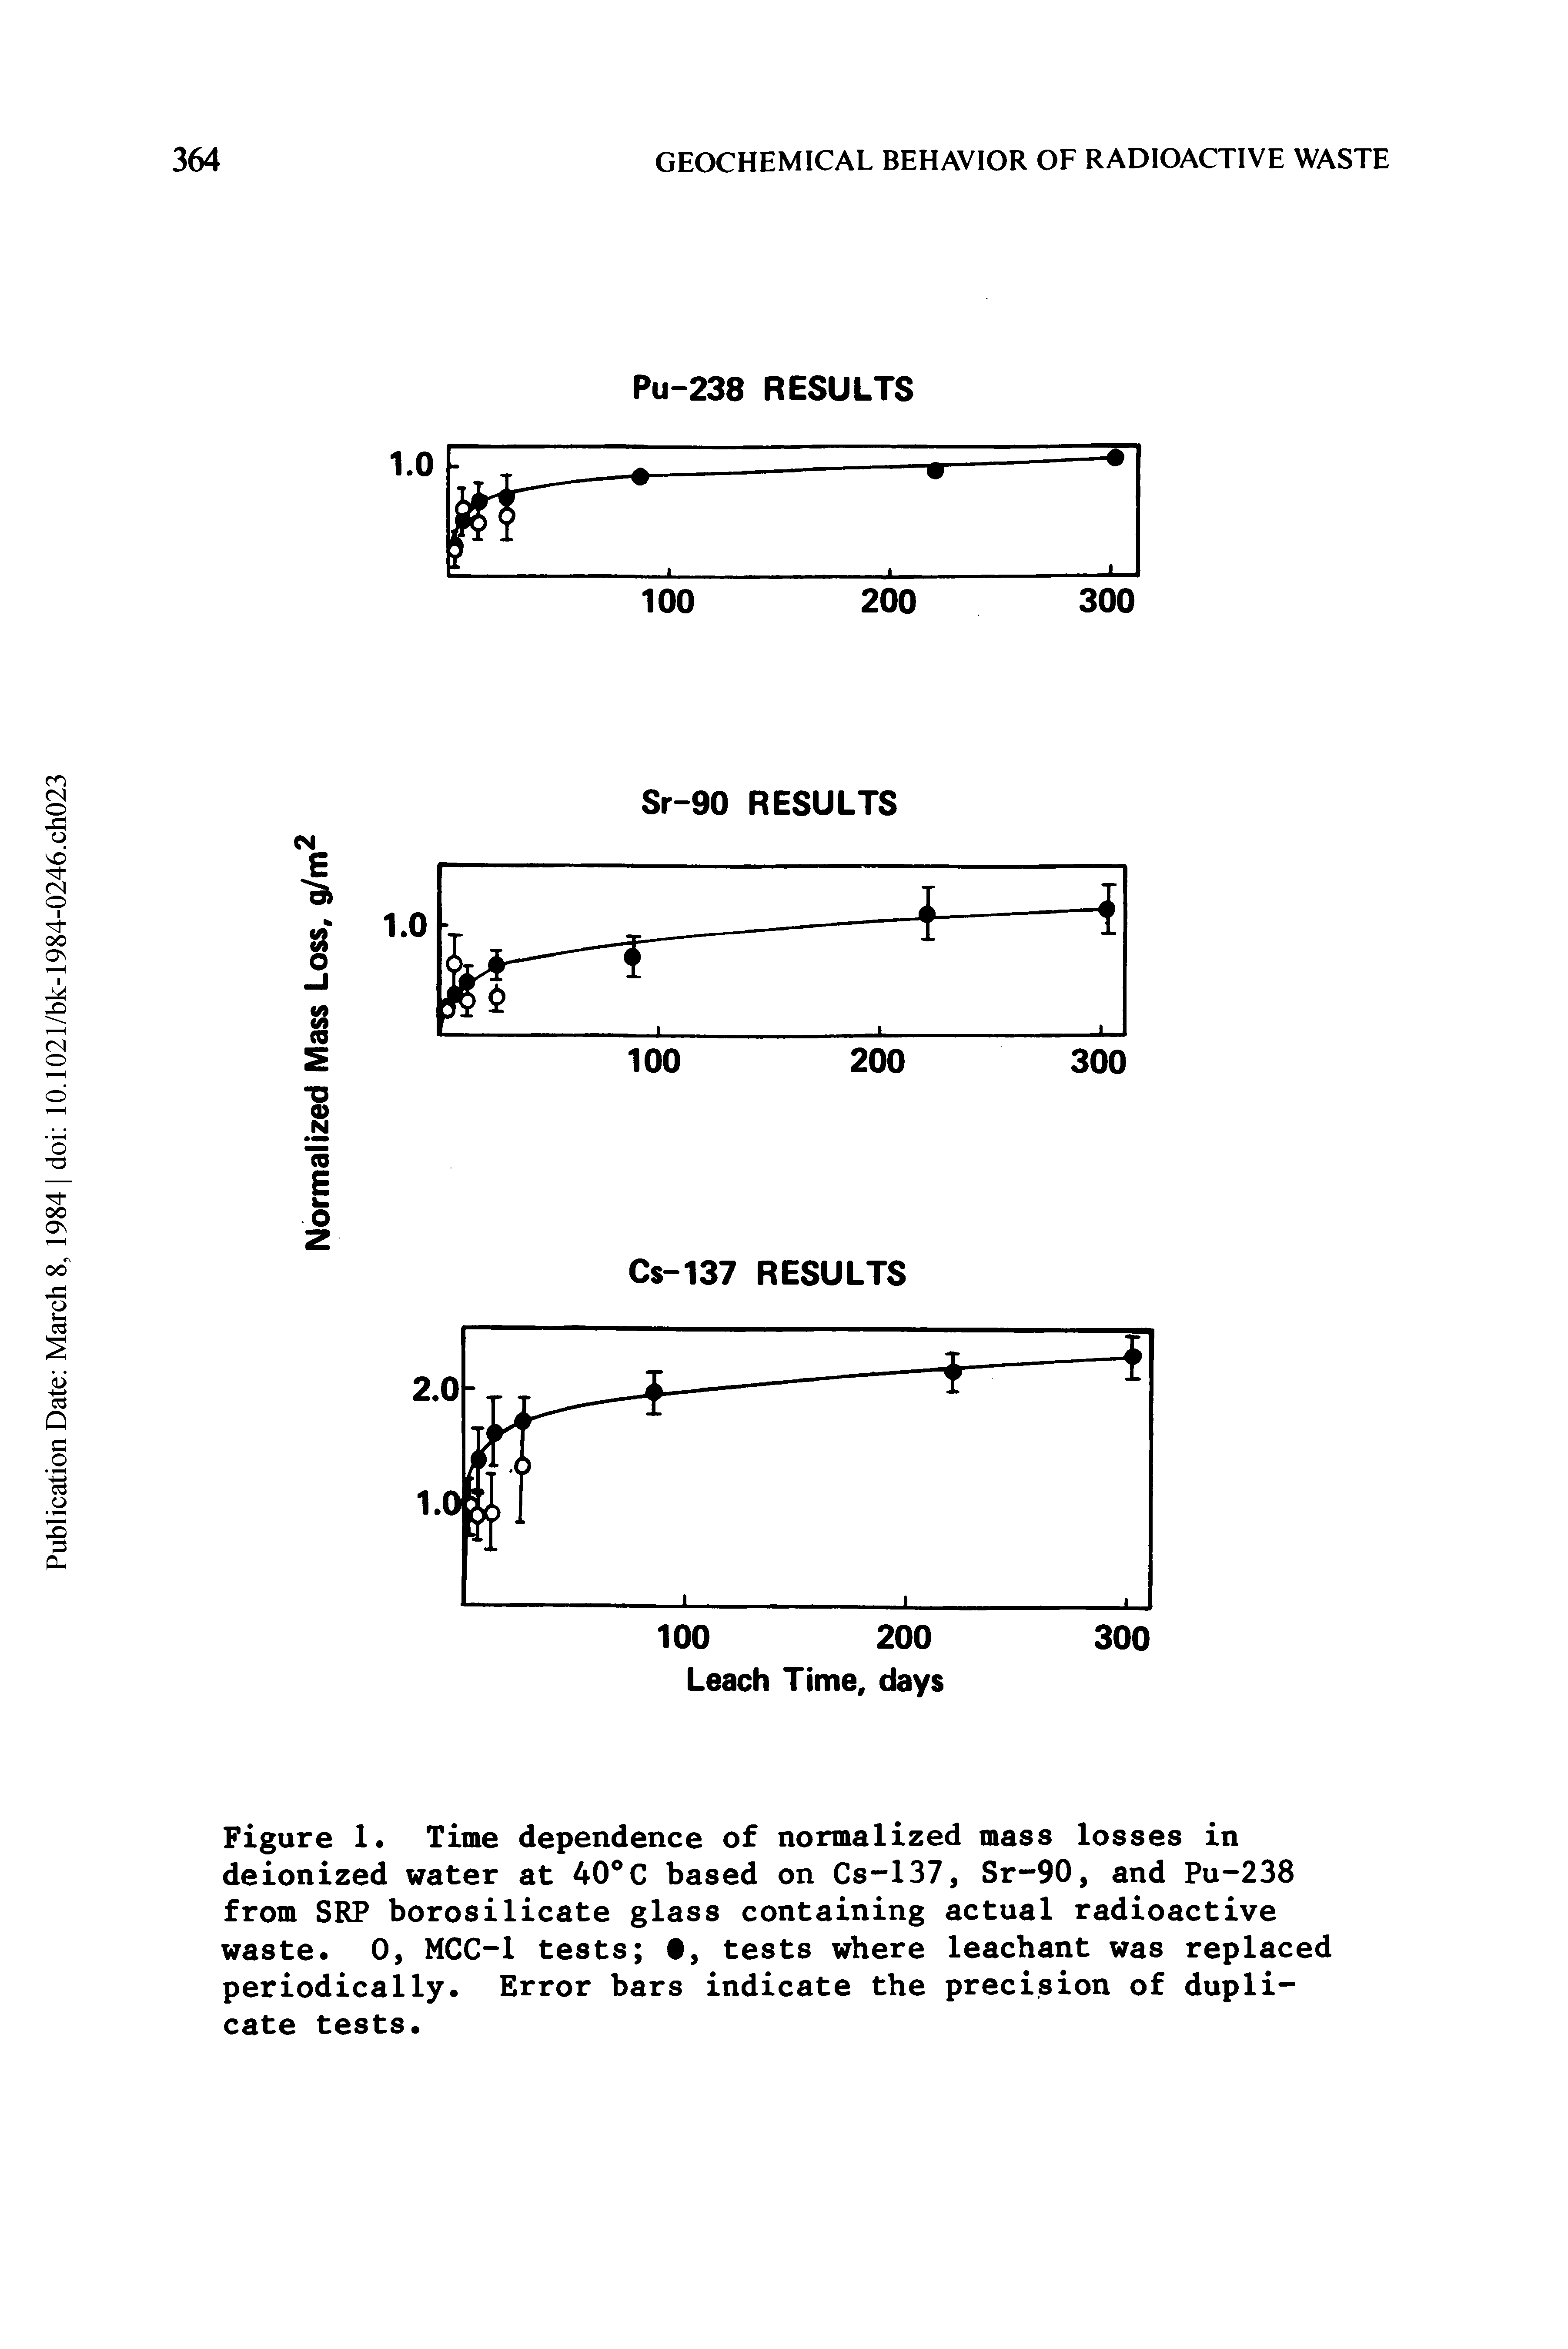 Figure 1 Time dependence of normalized mass losses in deionized water at 40°C based on Cs-137, Sr-90, and Pu-238 from SRP borosilicate glass containing actual radioactive waste. 0, MCC-1 tests , tests where leachant was replaced periodically. Error bars indicate the precision of duplicate tests.